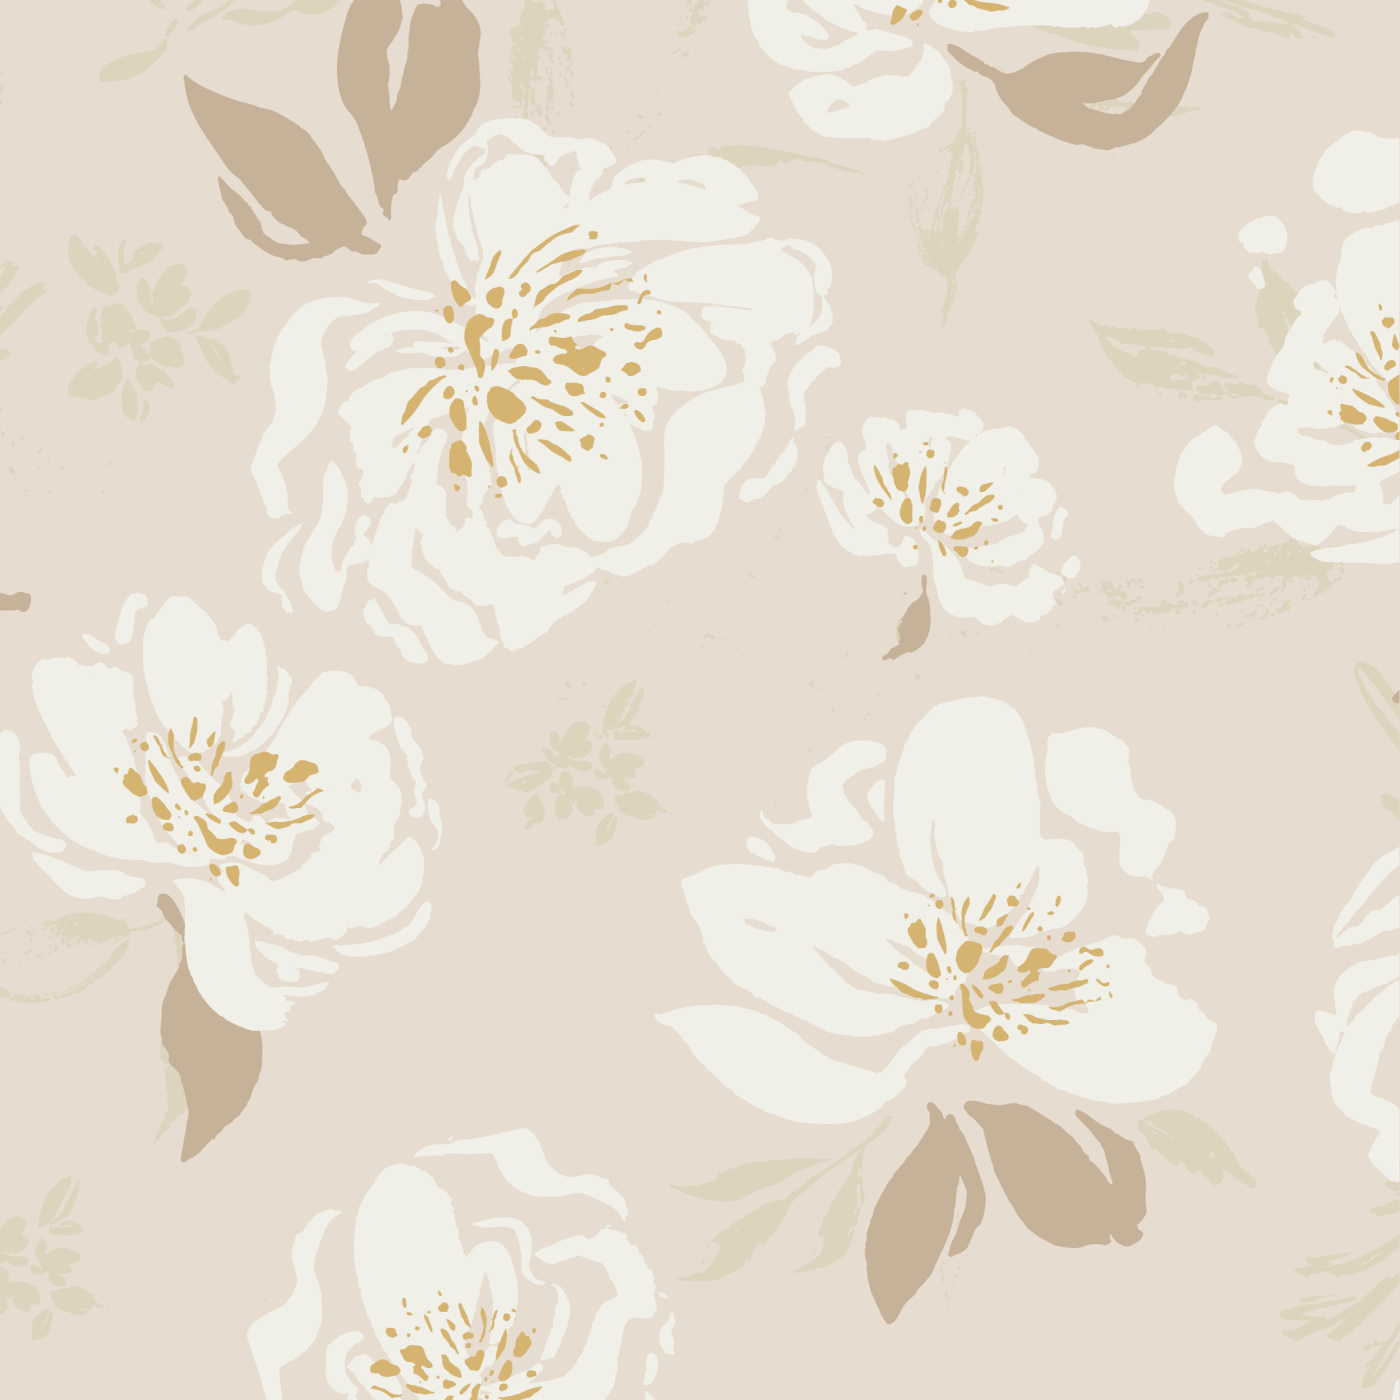 Neutral Roses Peel And Stick Removable Wallpaper. Love vs. Design